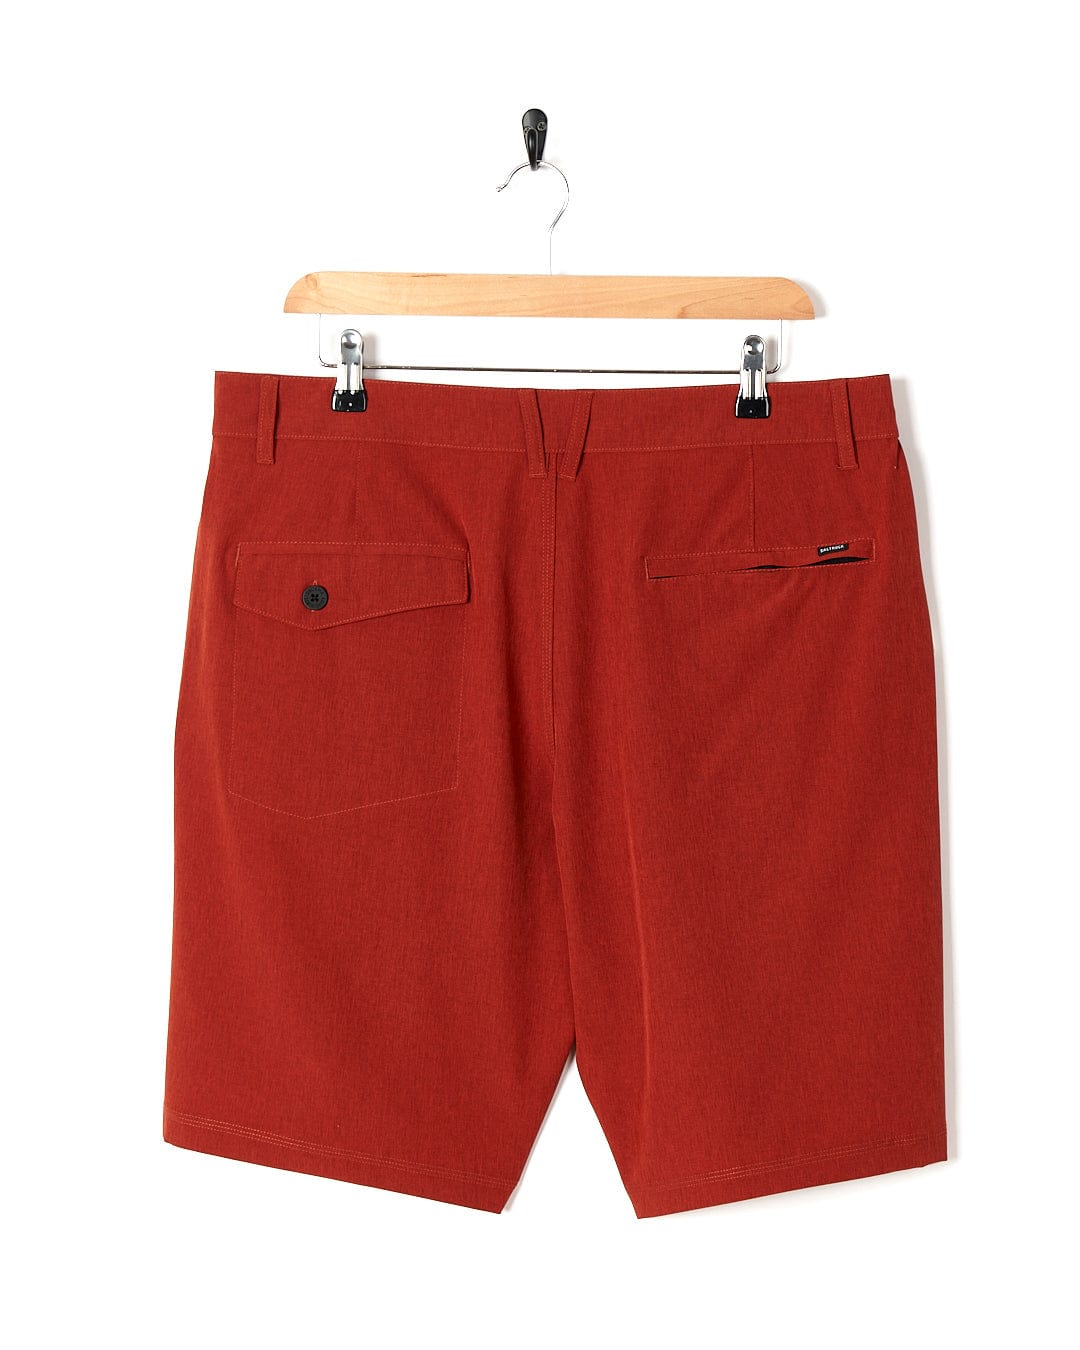 A pair of Amphibian II - Mens Boardshort - Red shorts hanging on a hanger by Saltrock.